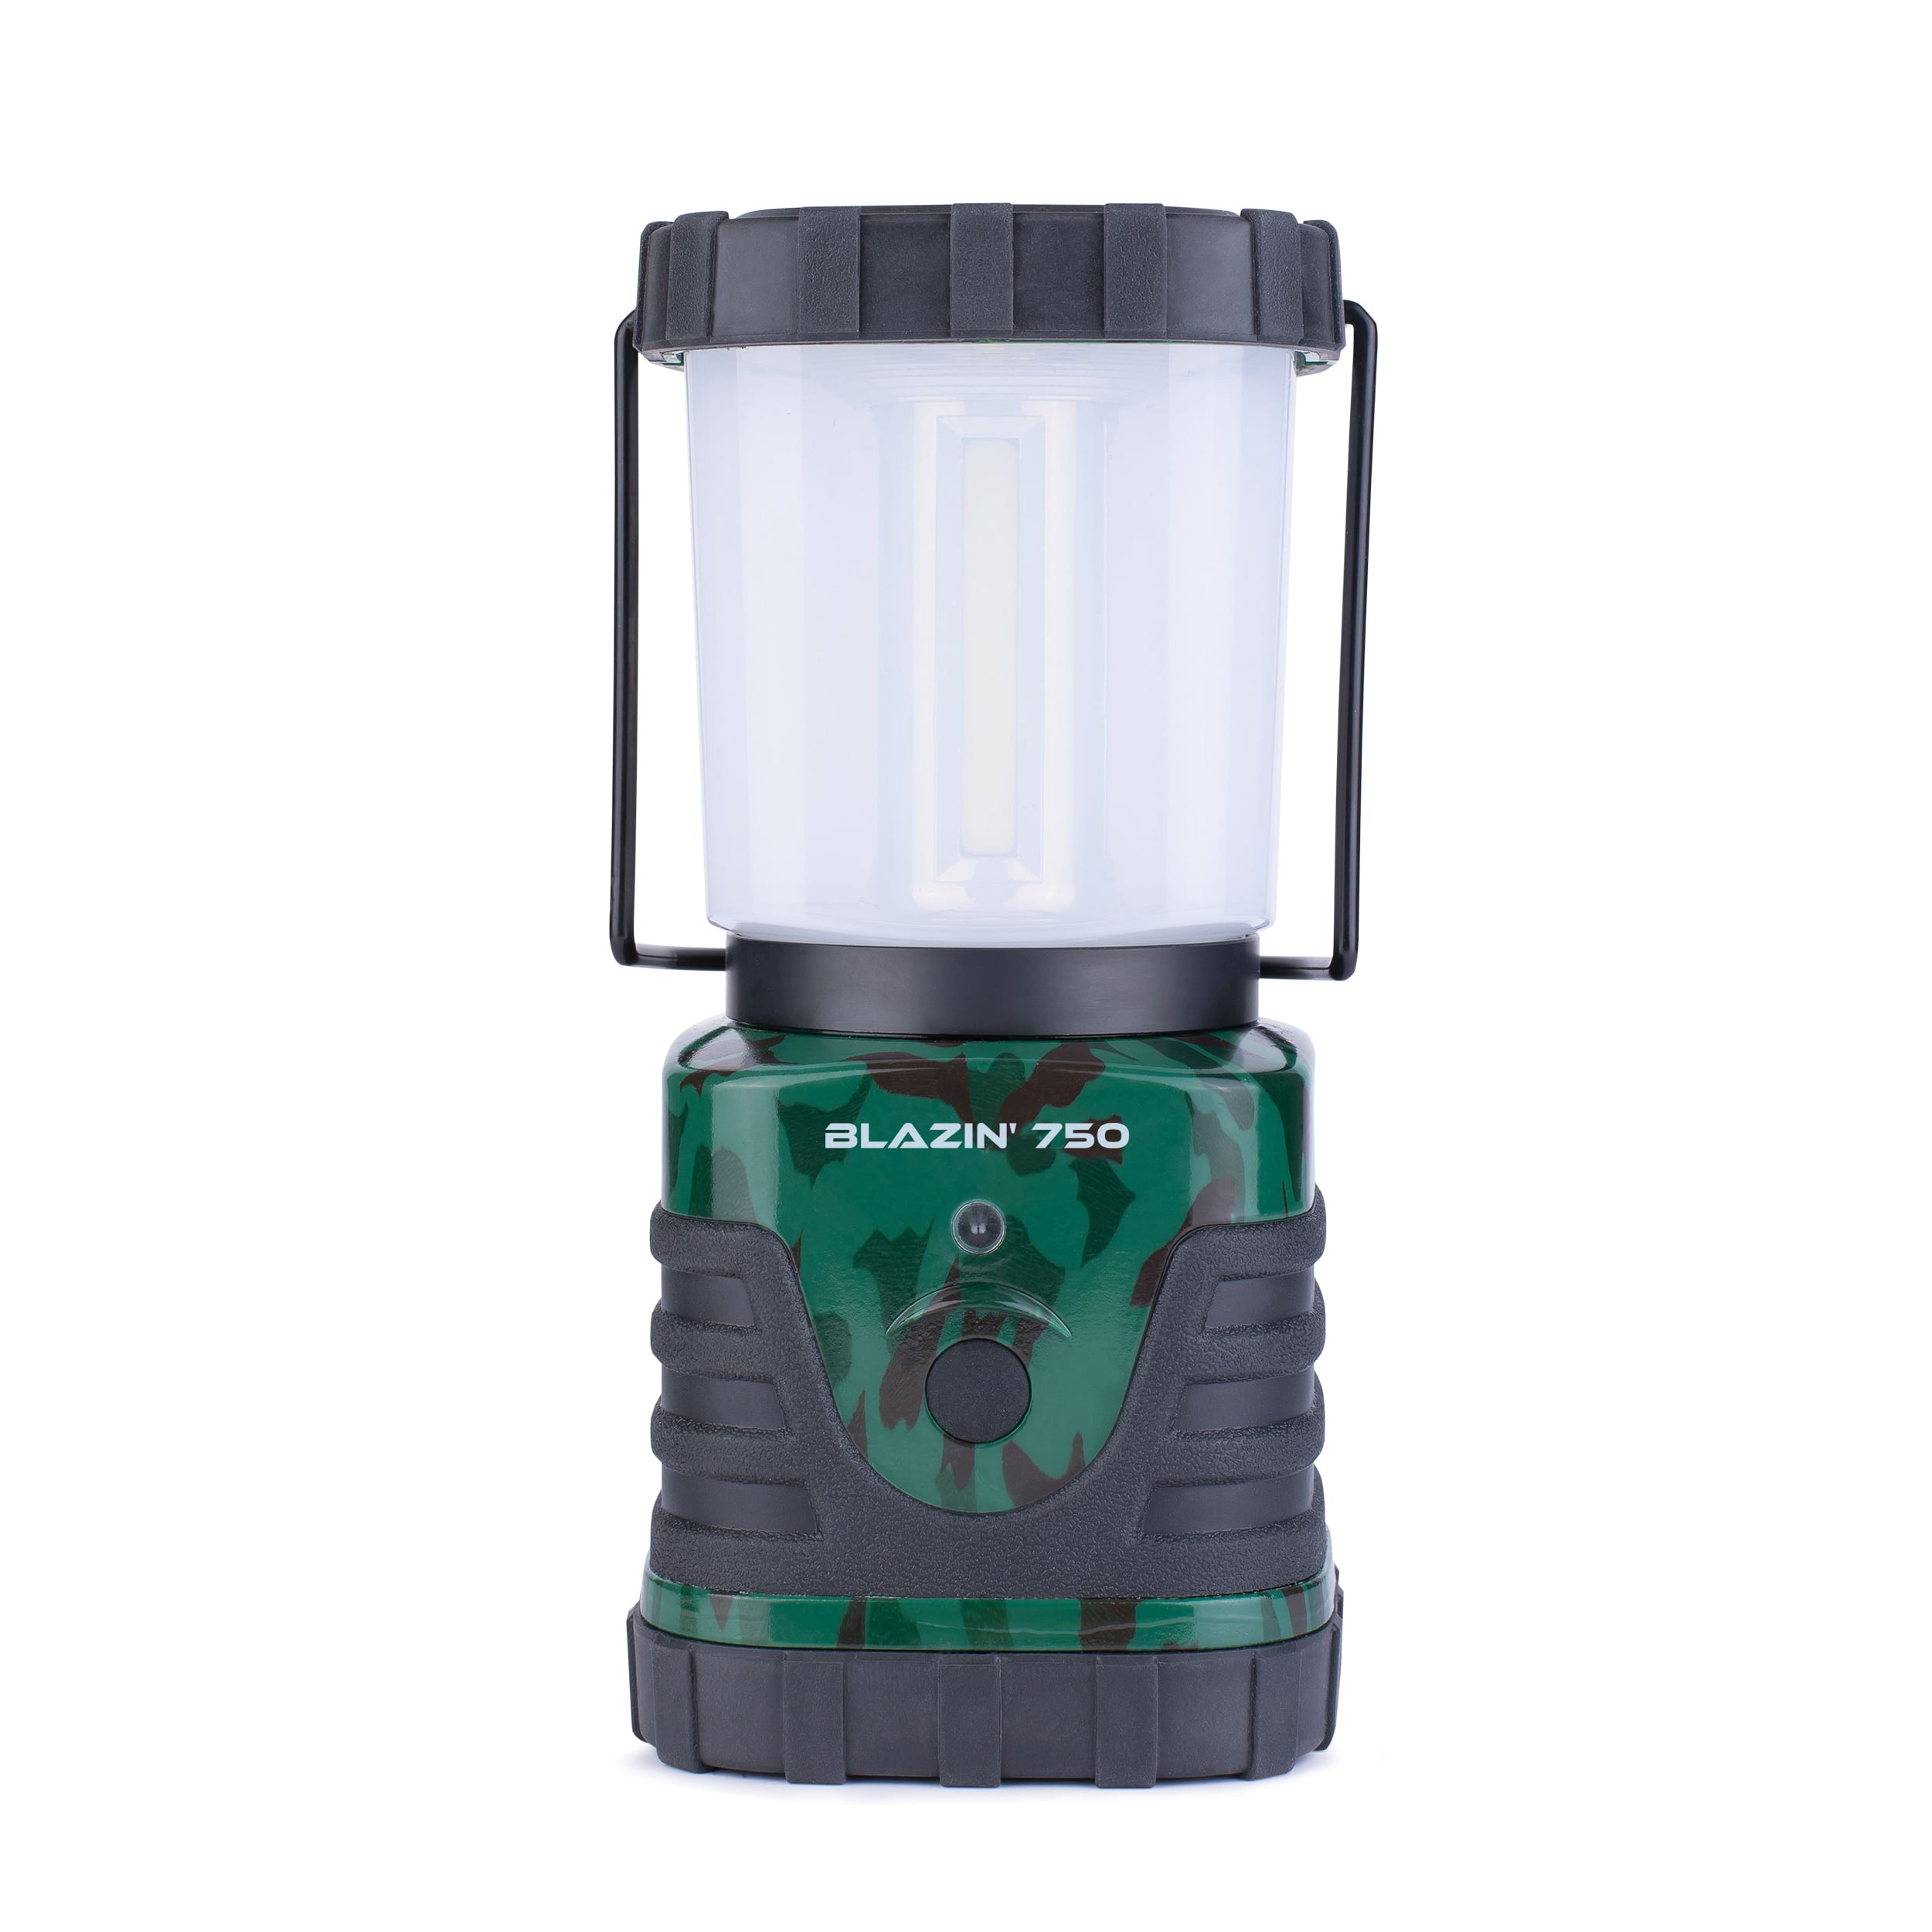 Emergency Storm Phone Charger Blazin Bison Brightest Rechargeable LED Lantern 400 Hour Runtime Hurricane 400 Lumen, Green